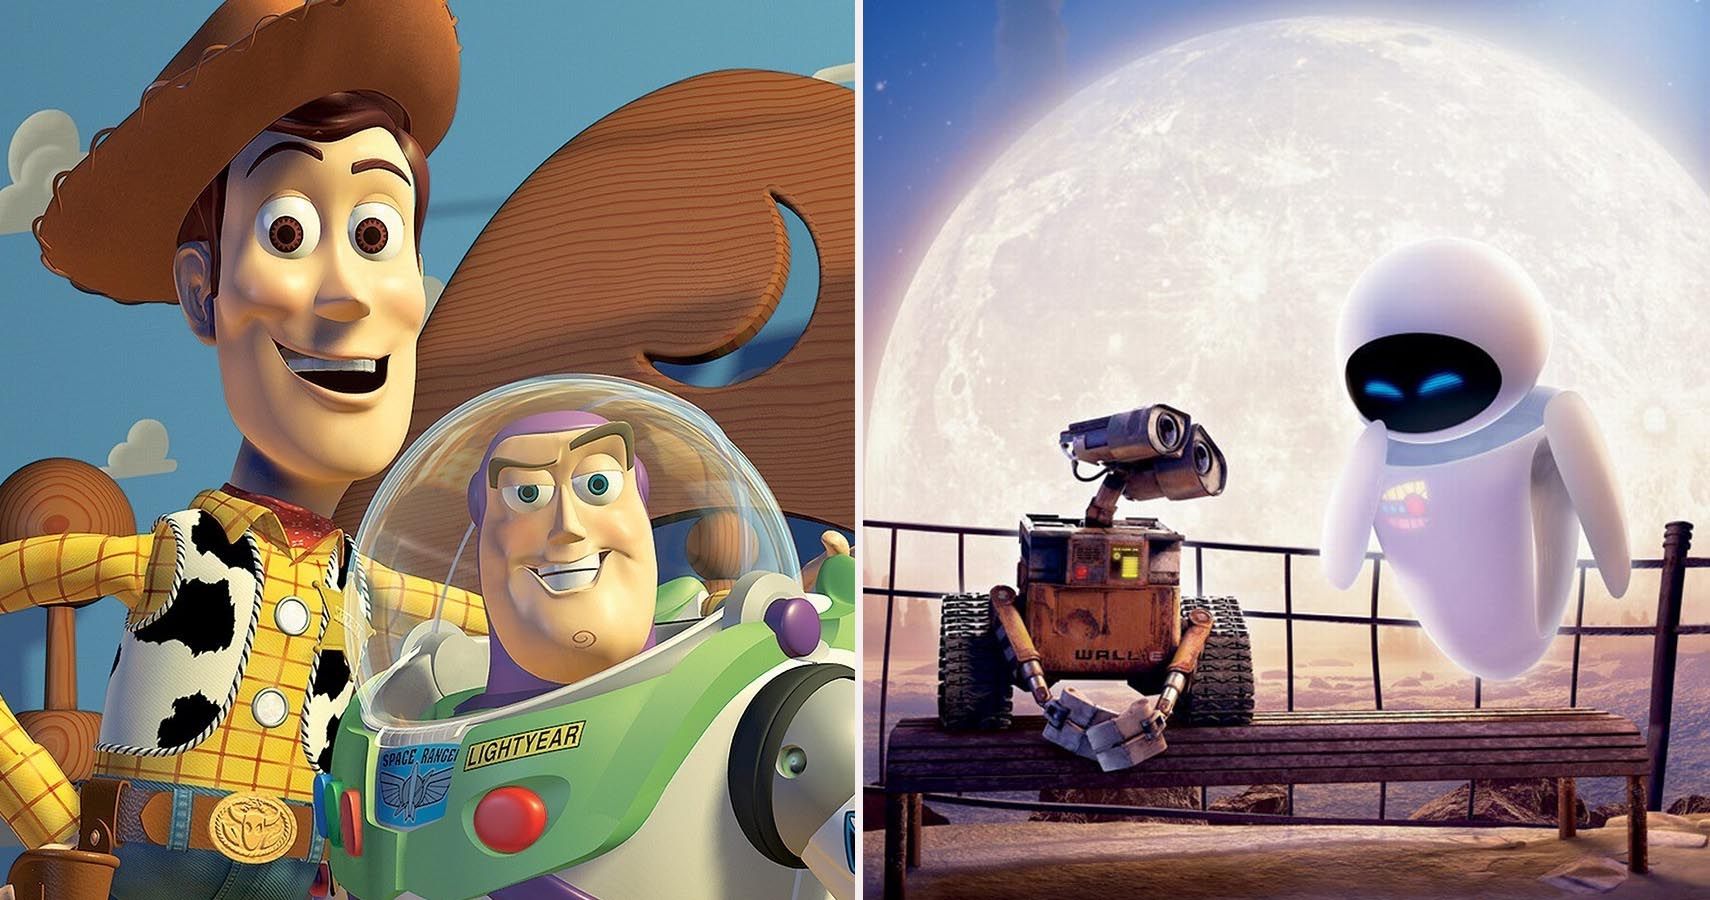 10 Of The Best Pixar Movies Based On Their Rotten Tomatoes Scores